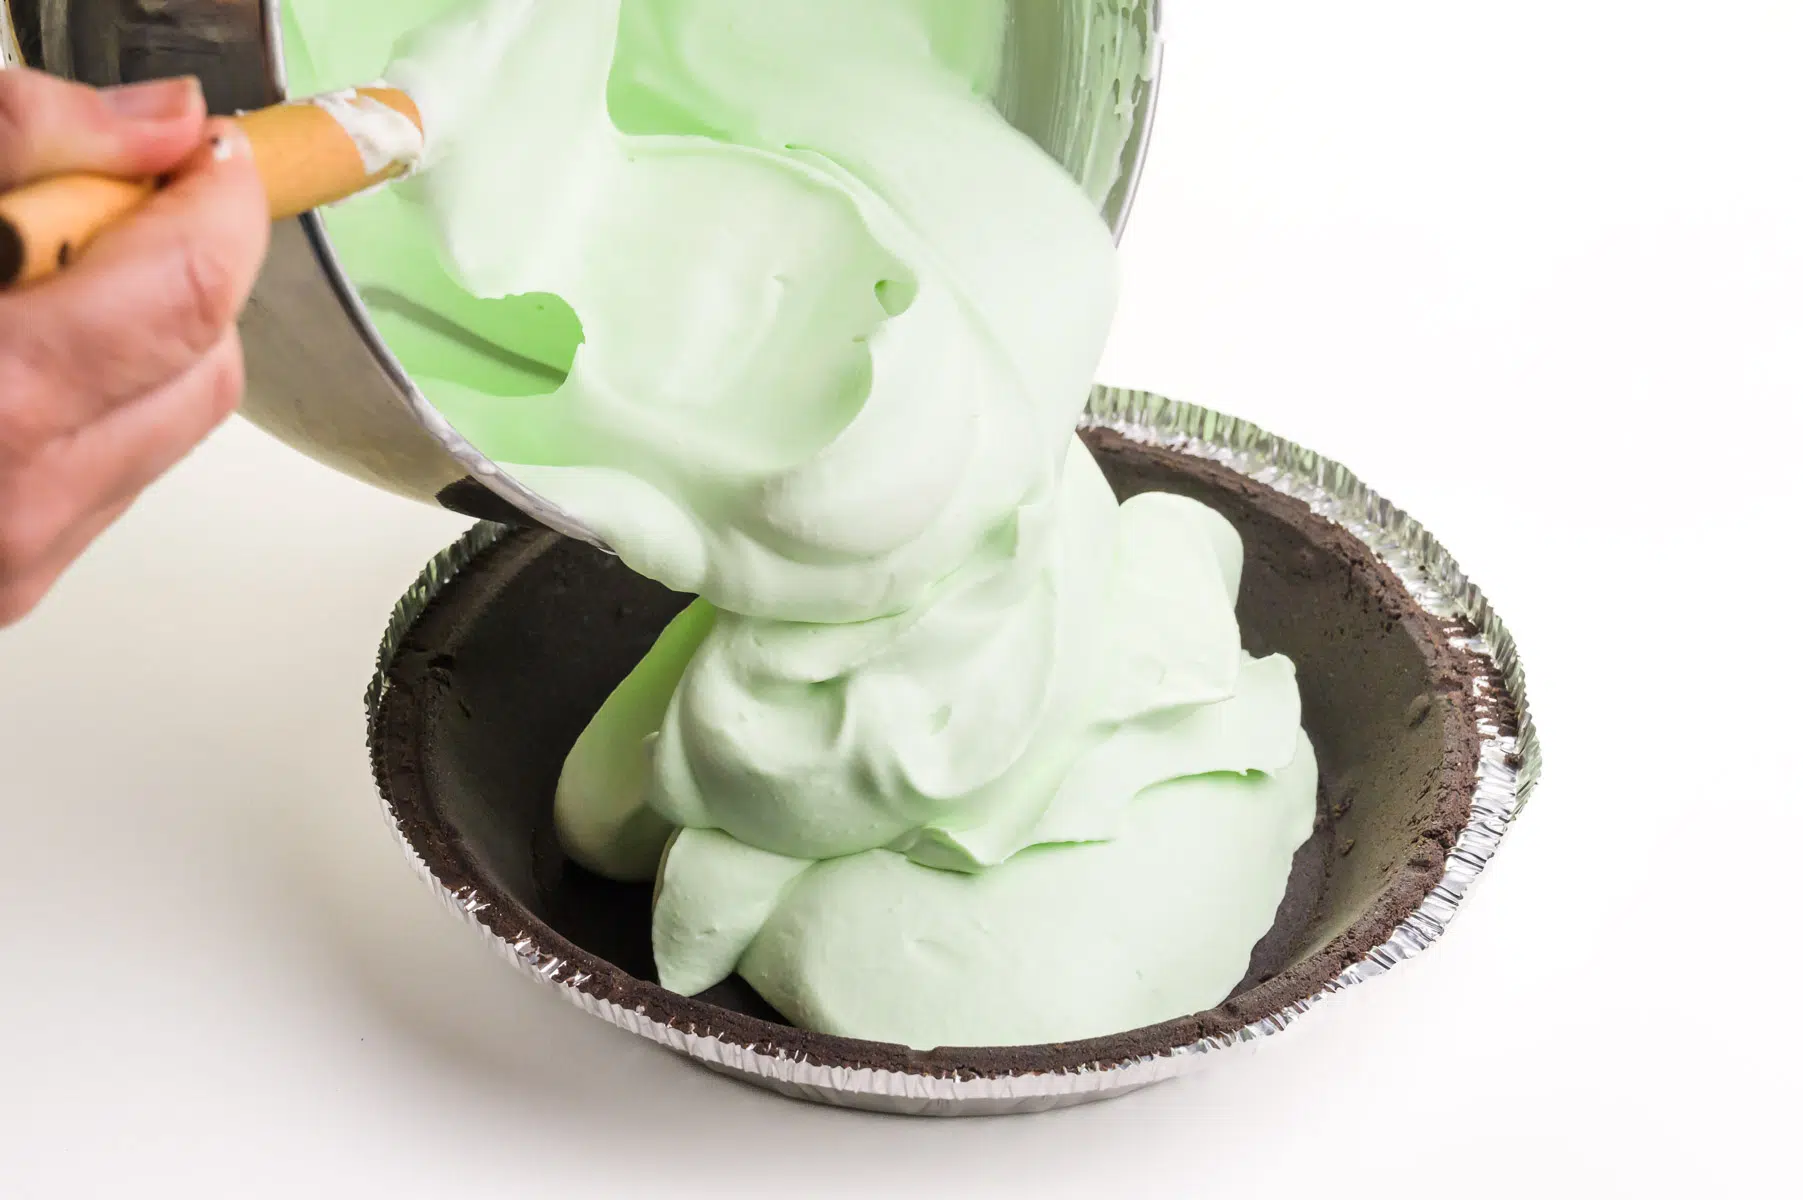 Green whipped mousse is being poured into a chocolate pie crust.